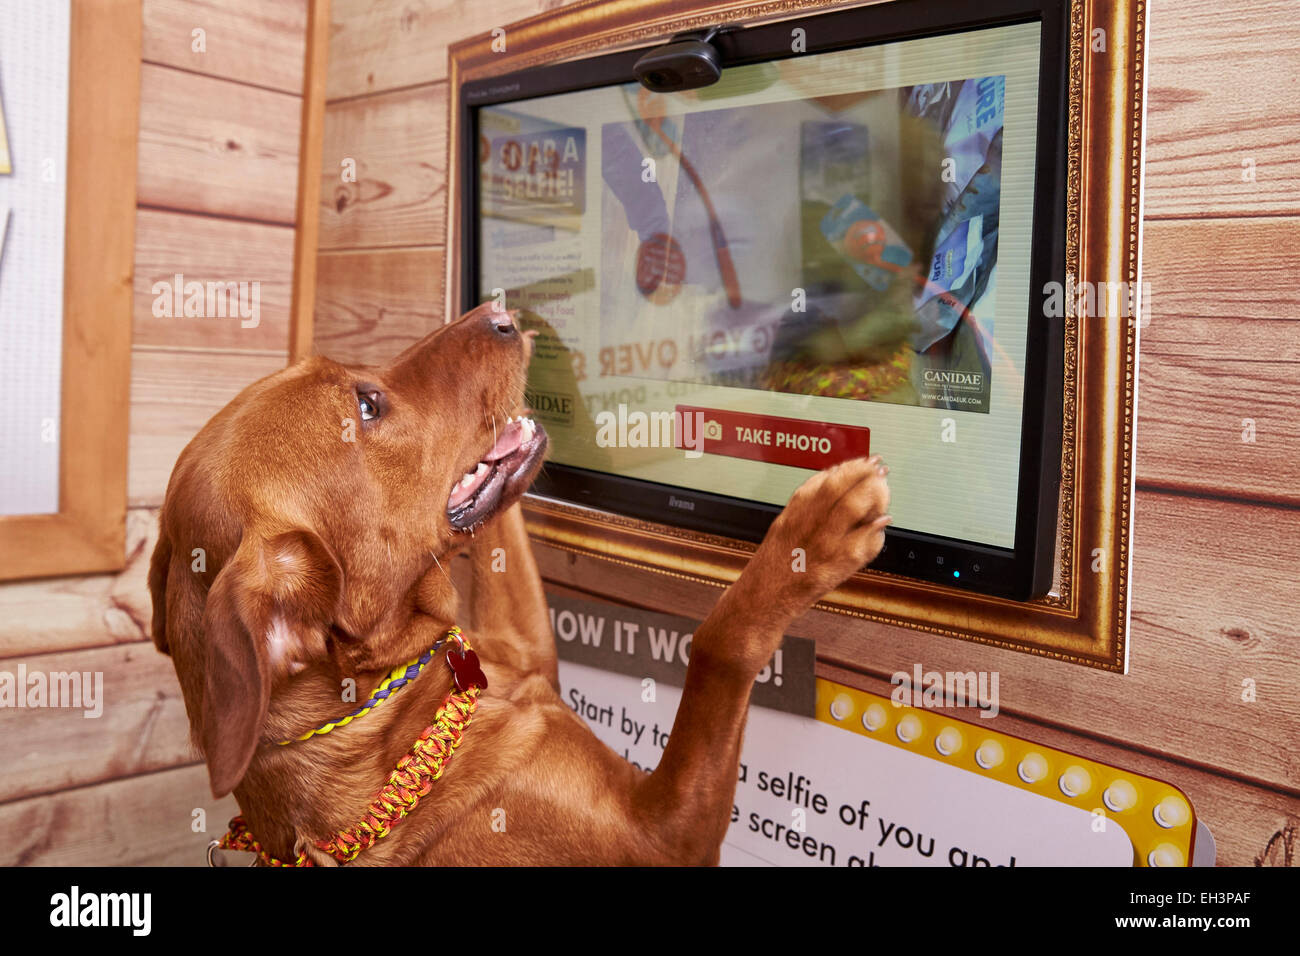 Birmingham UK Friday 6th March 2015. Puzzle, a fox red labrador tries the world's first dog selfie mirror. The Pet Selfie Mirror works by triggering a pressure sensor when the pet steps into place, taking a photograph and sharing this to the Canidae Facebook and Twitter pages. The Pet Selfie Mirror has been created to celebrate the nation's love of pets, and especially the fondness of sharing snaps of furry friends online. Puzzle, a fox red labrador tries the world's first dog selfie mirror. Credit:  Edward Moss/Alamy Live News Stock Photo